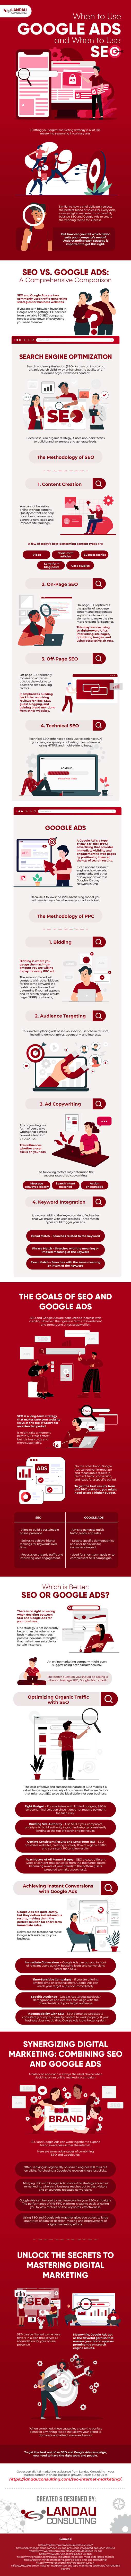 When to Use Google Ads and When to Use SEO Infographic Image 02